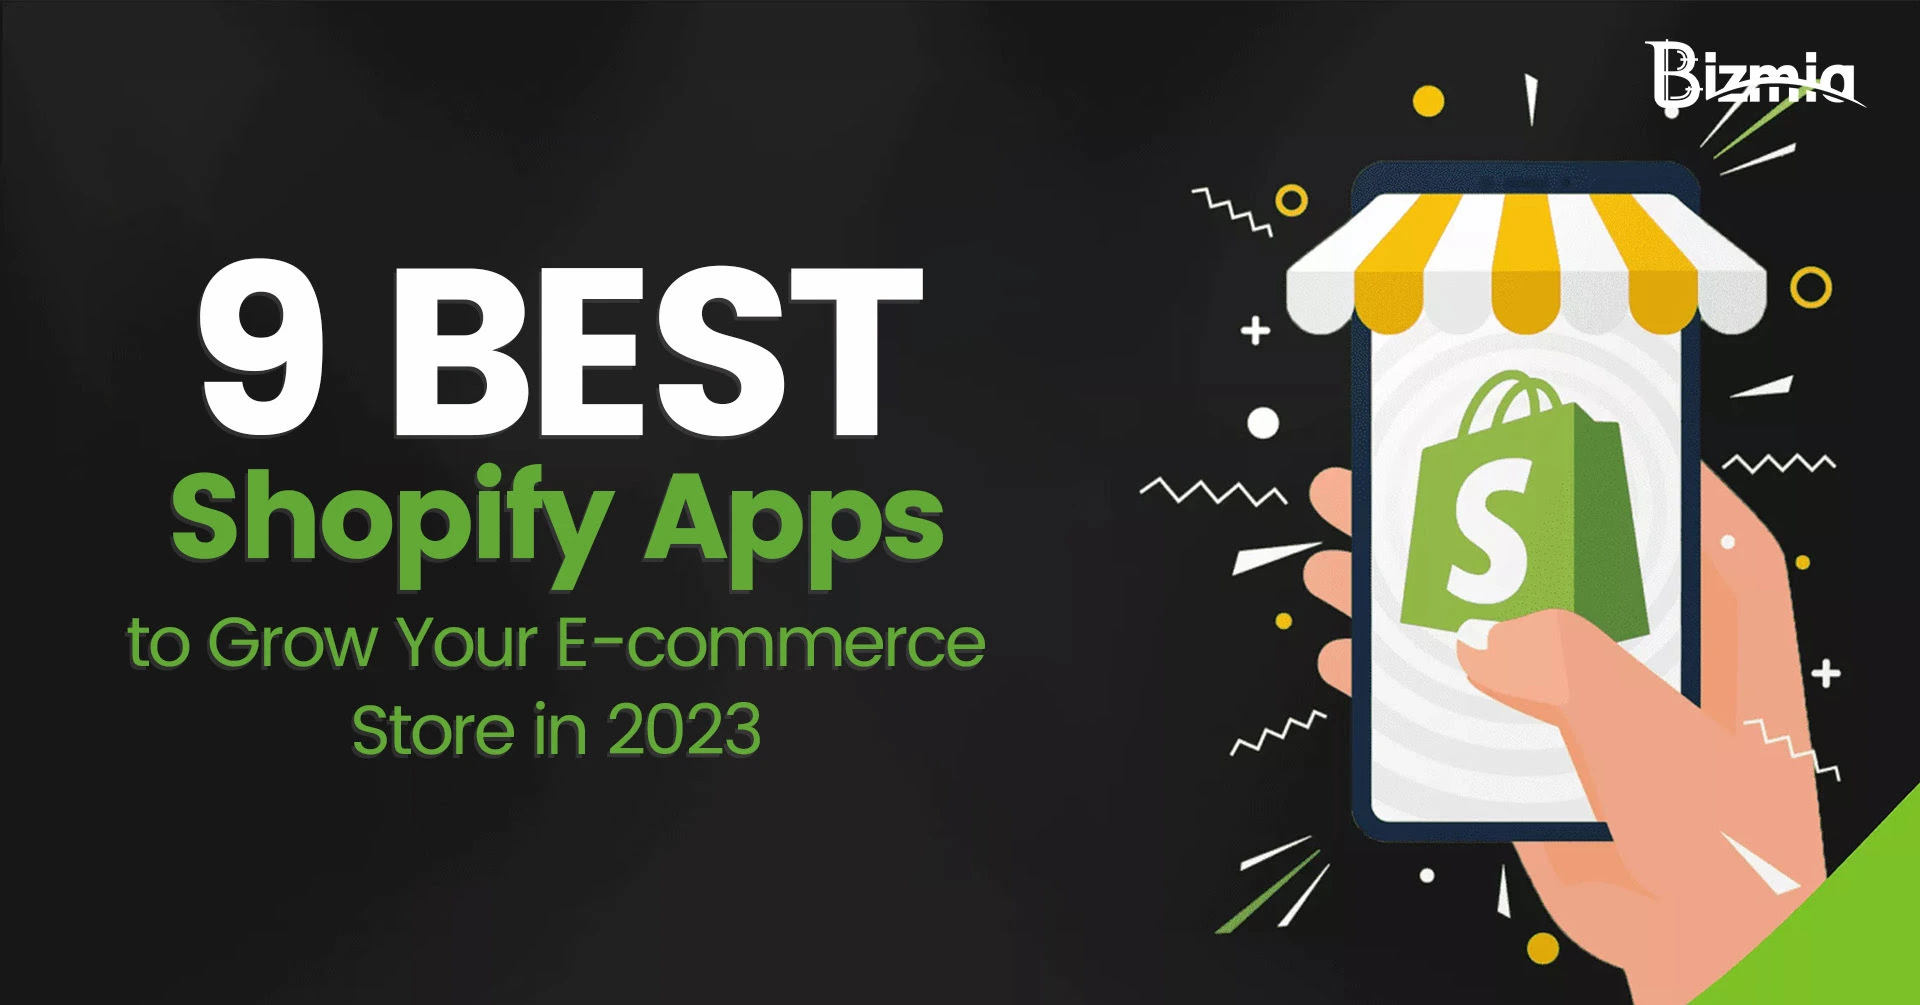 9 Best Shopify Apps